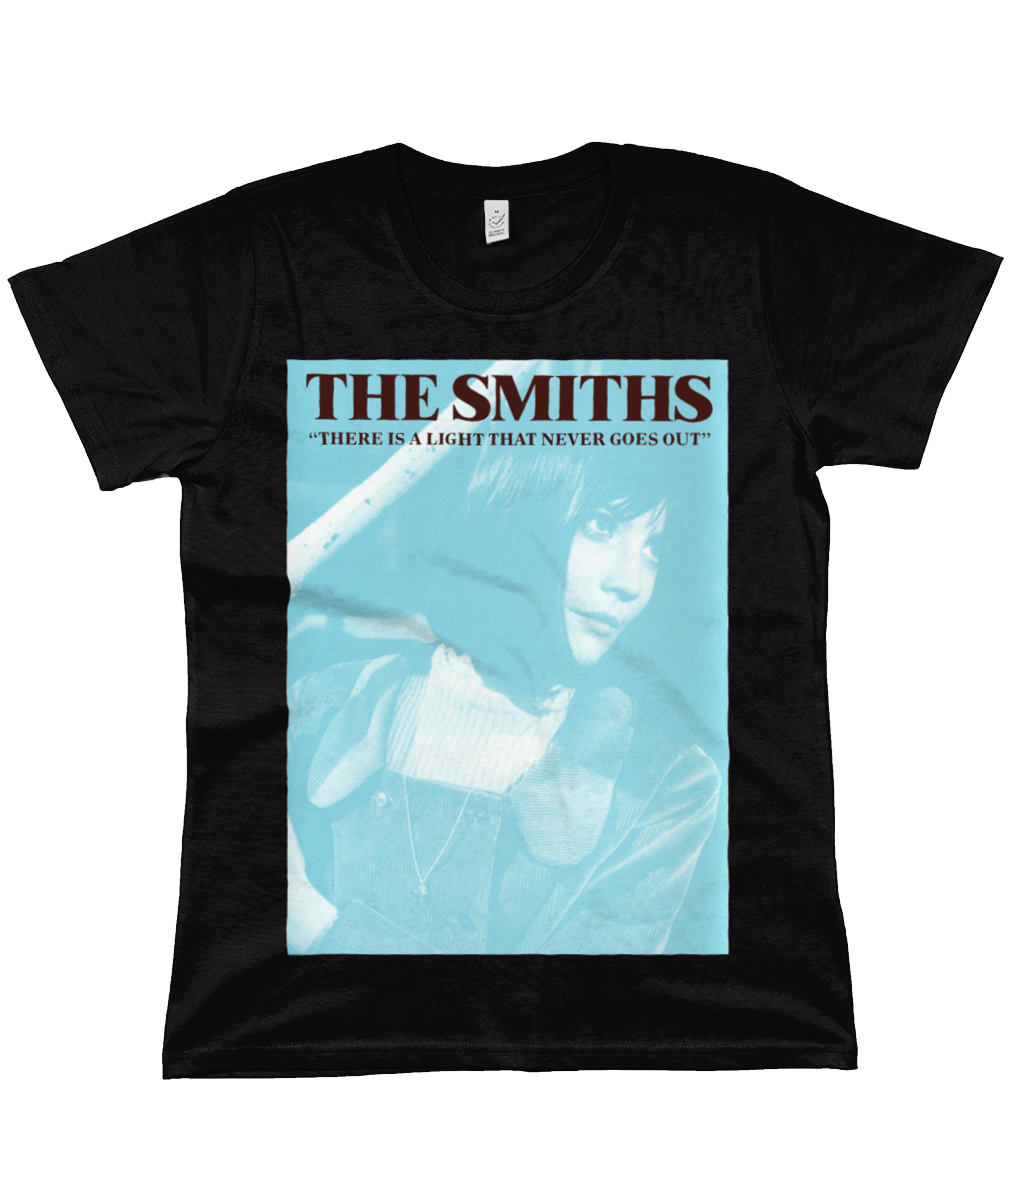 THE SMITHS - THERE IS A LIGHT THAT NEVER GOES OUT - 1992 - Top Text - Women's T Shirt